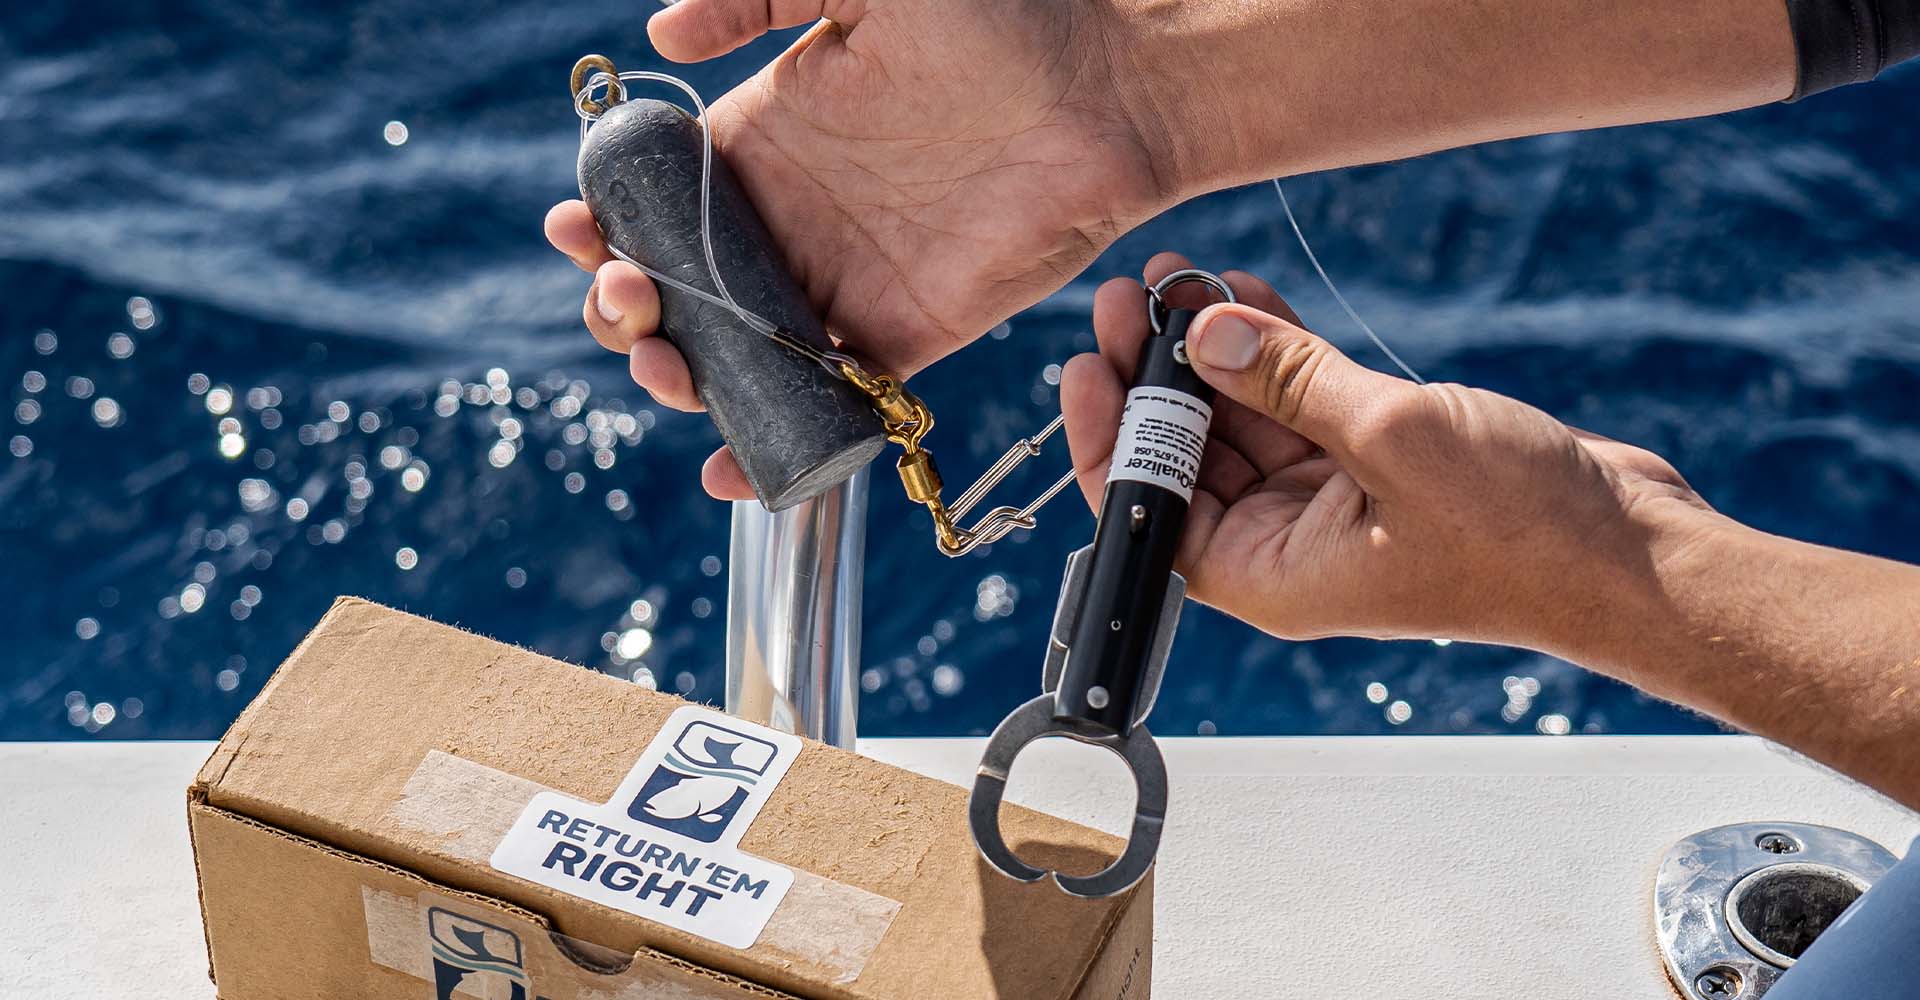 Photo of a person holding a fish descending device with a 3 pound weight over a cardboard box with a sticker on it that says Return 'Em Right